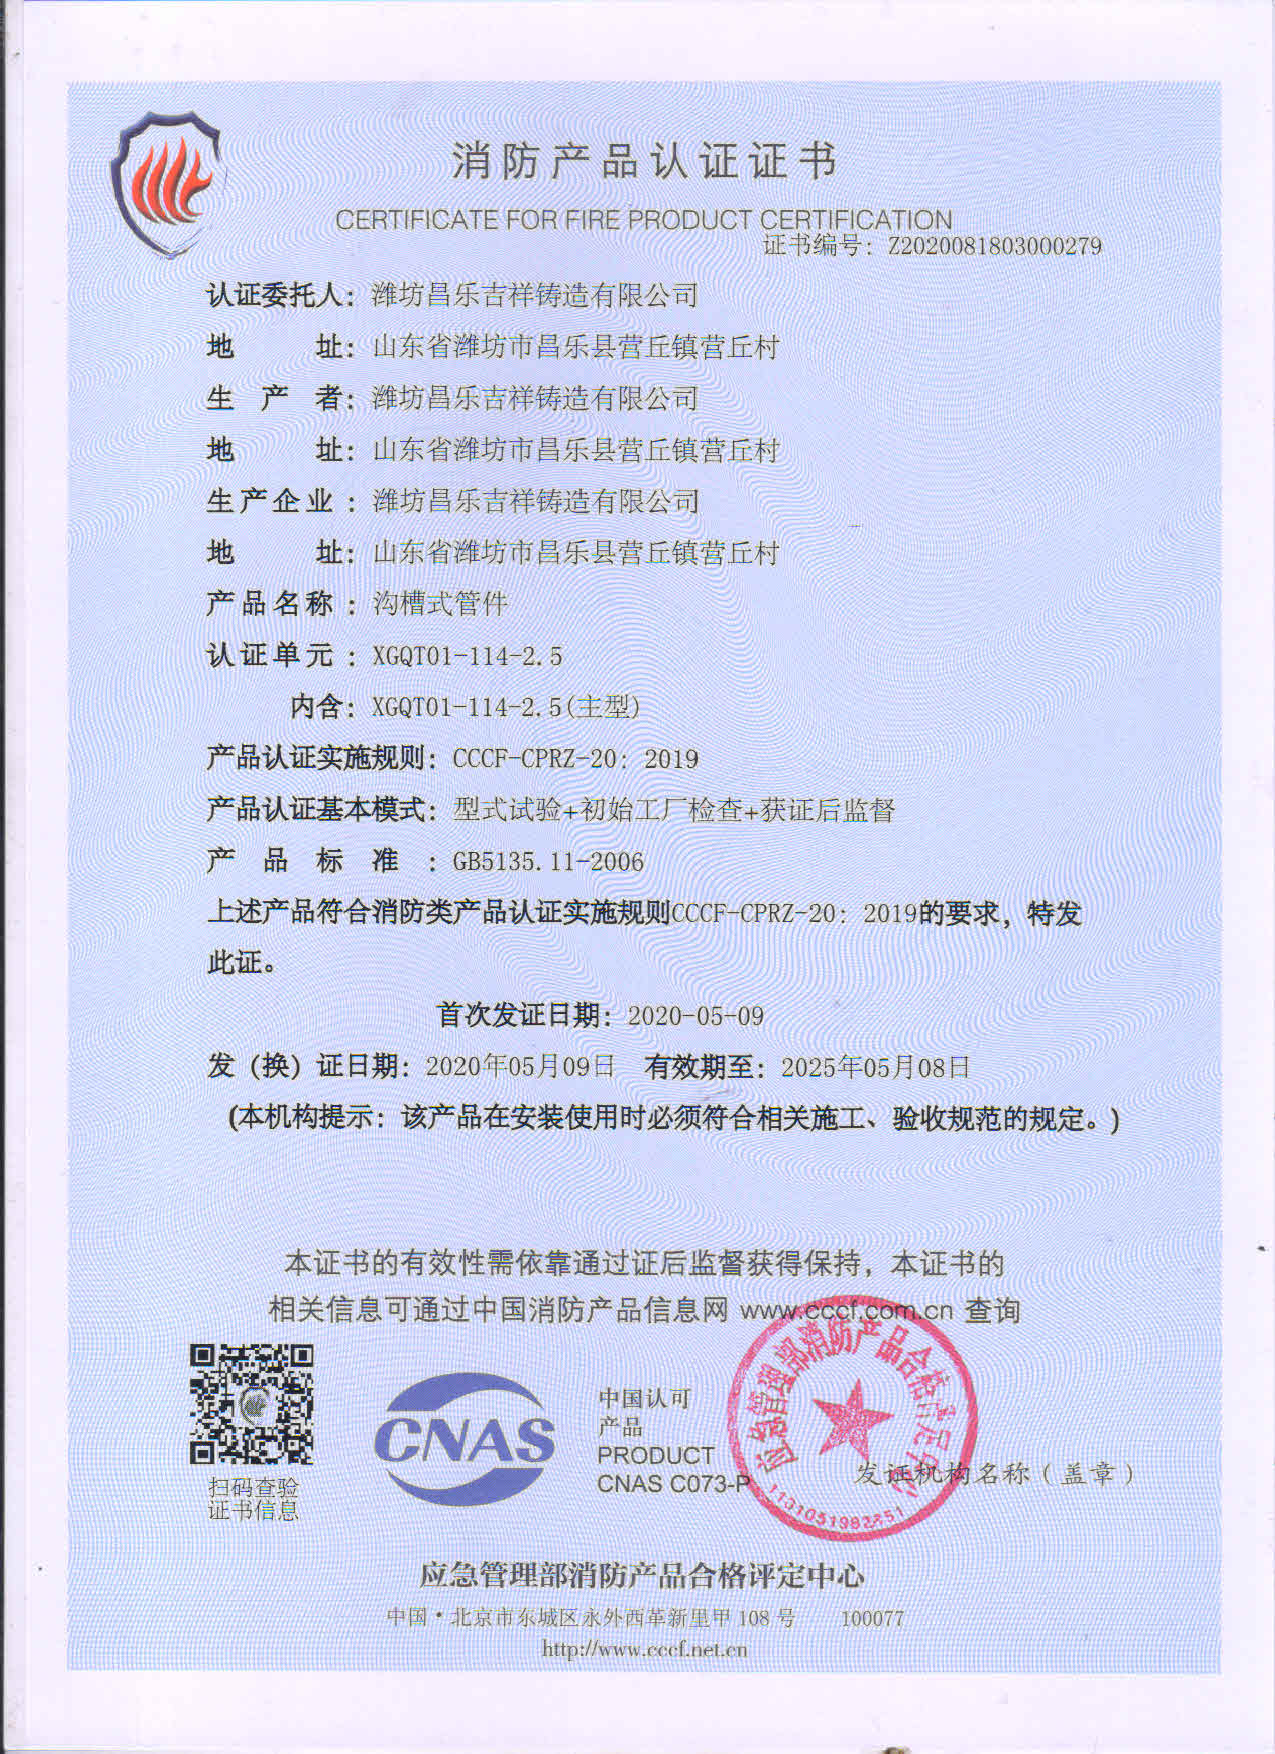 Certificate for the Fire Product Certification 